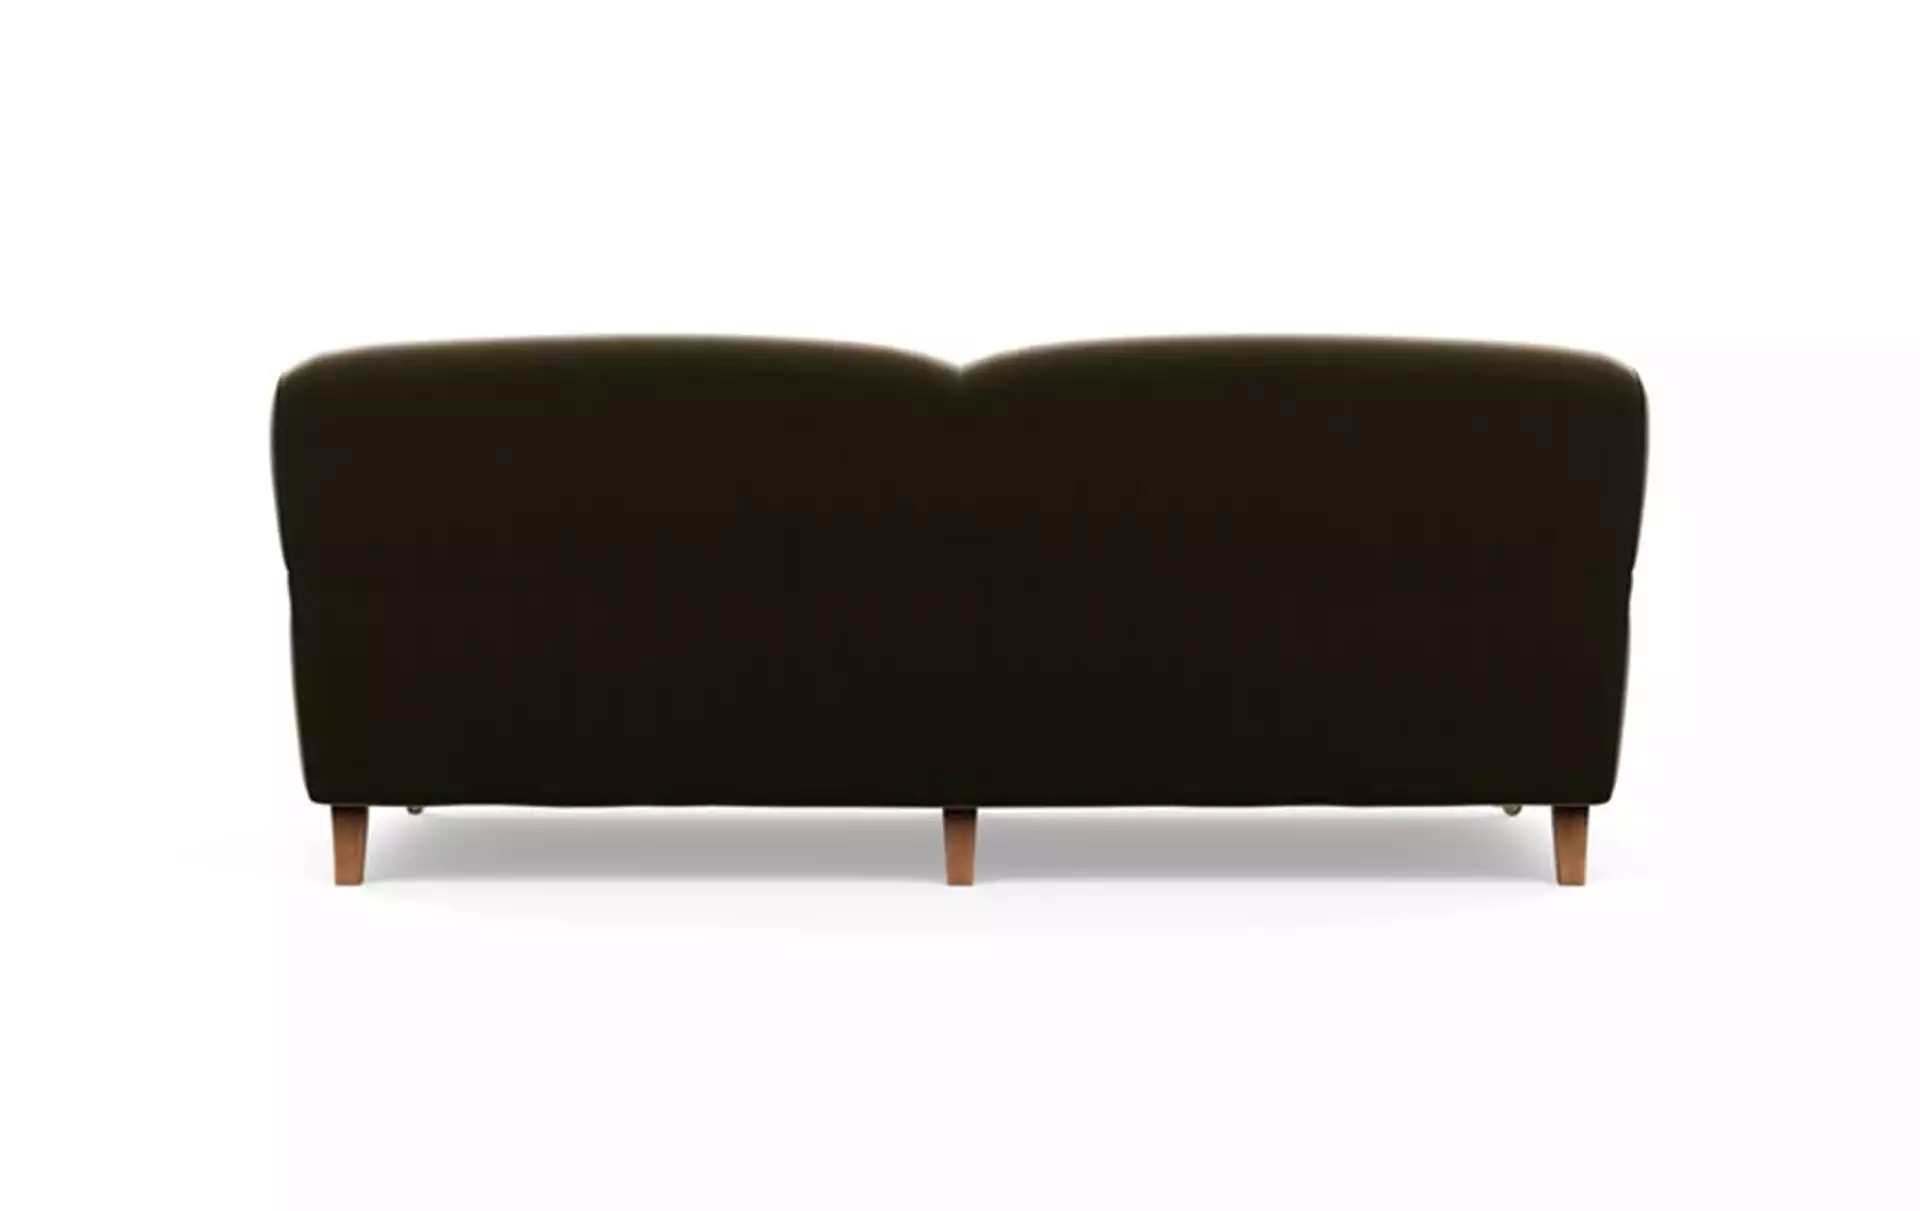 Rose by The Everygirl Sofa with Brown Quartz Fabric and Oiled Walnut with Brass Caster legs